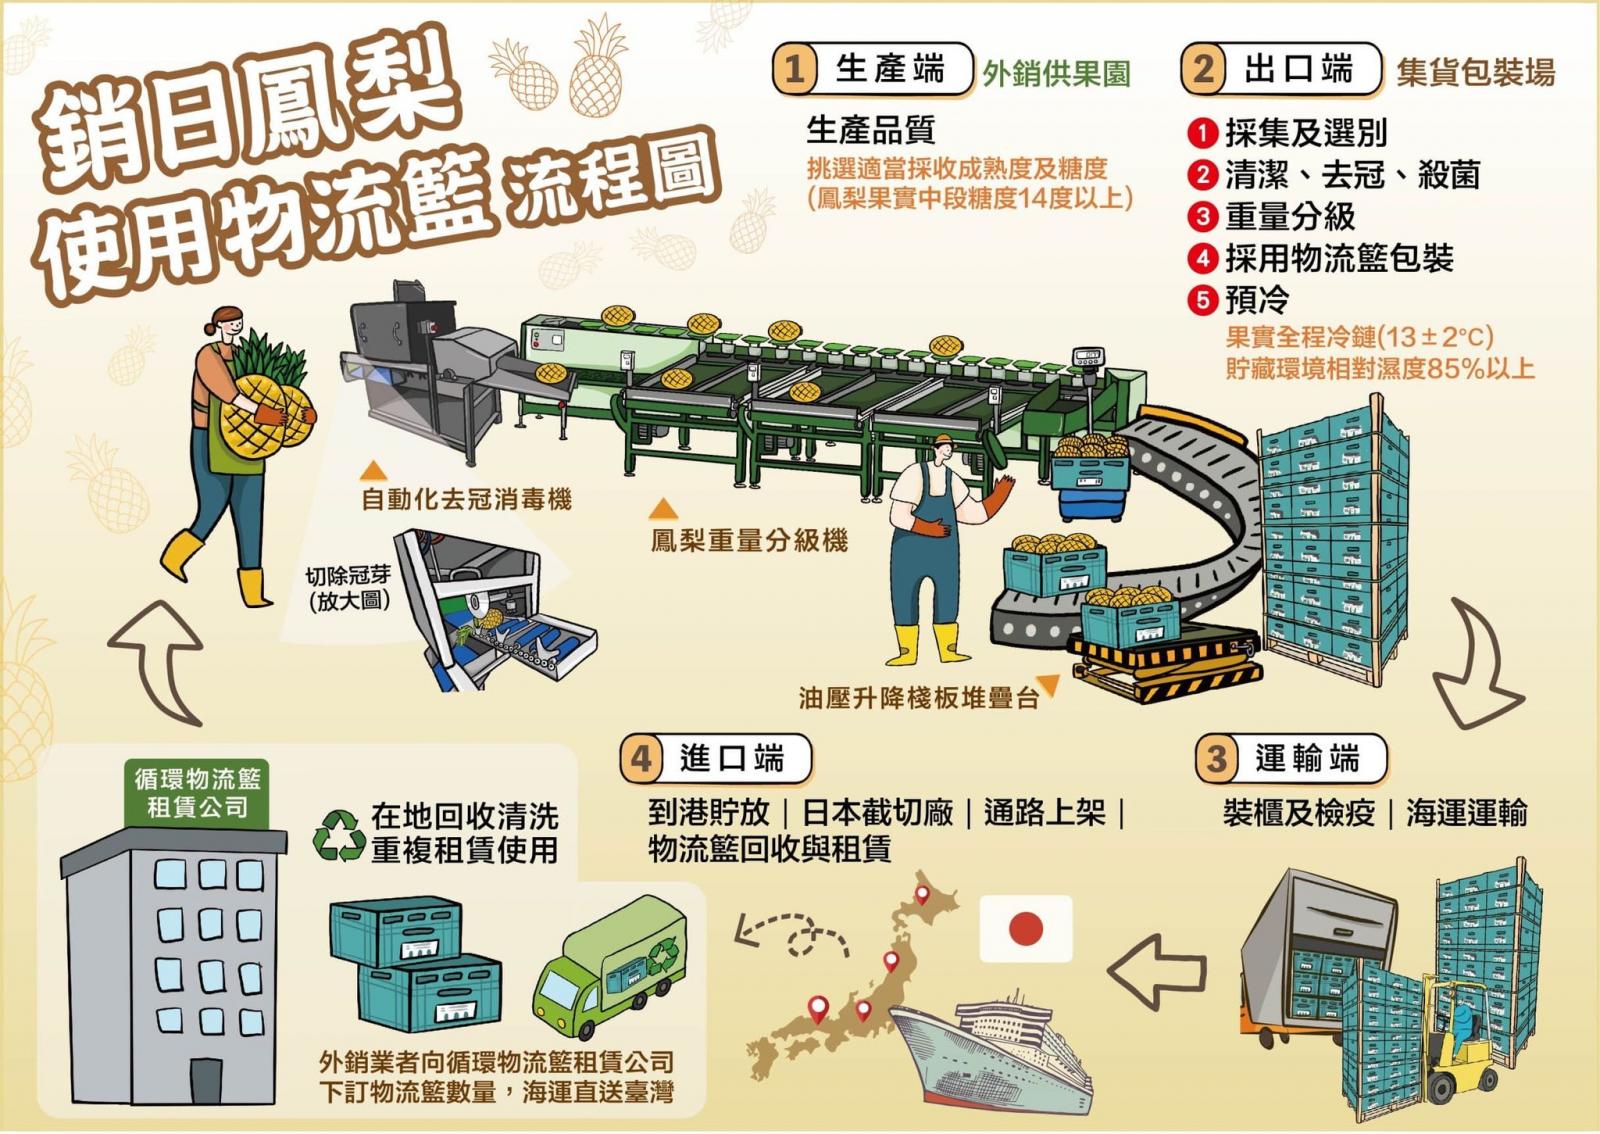 A graphic depiction of the use of reusable shipping baskets to export pineapples to Japan.